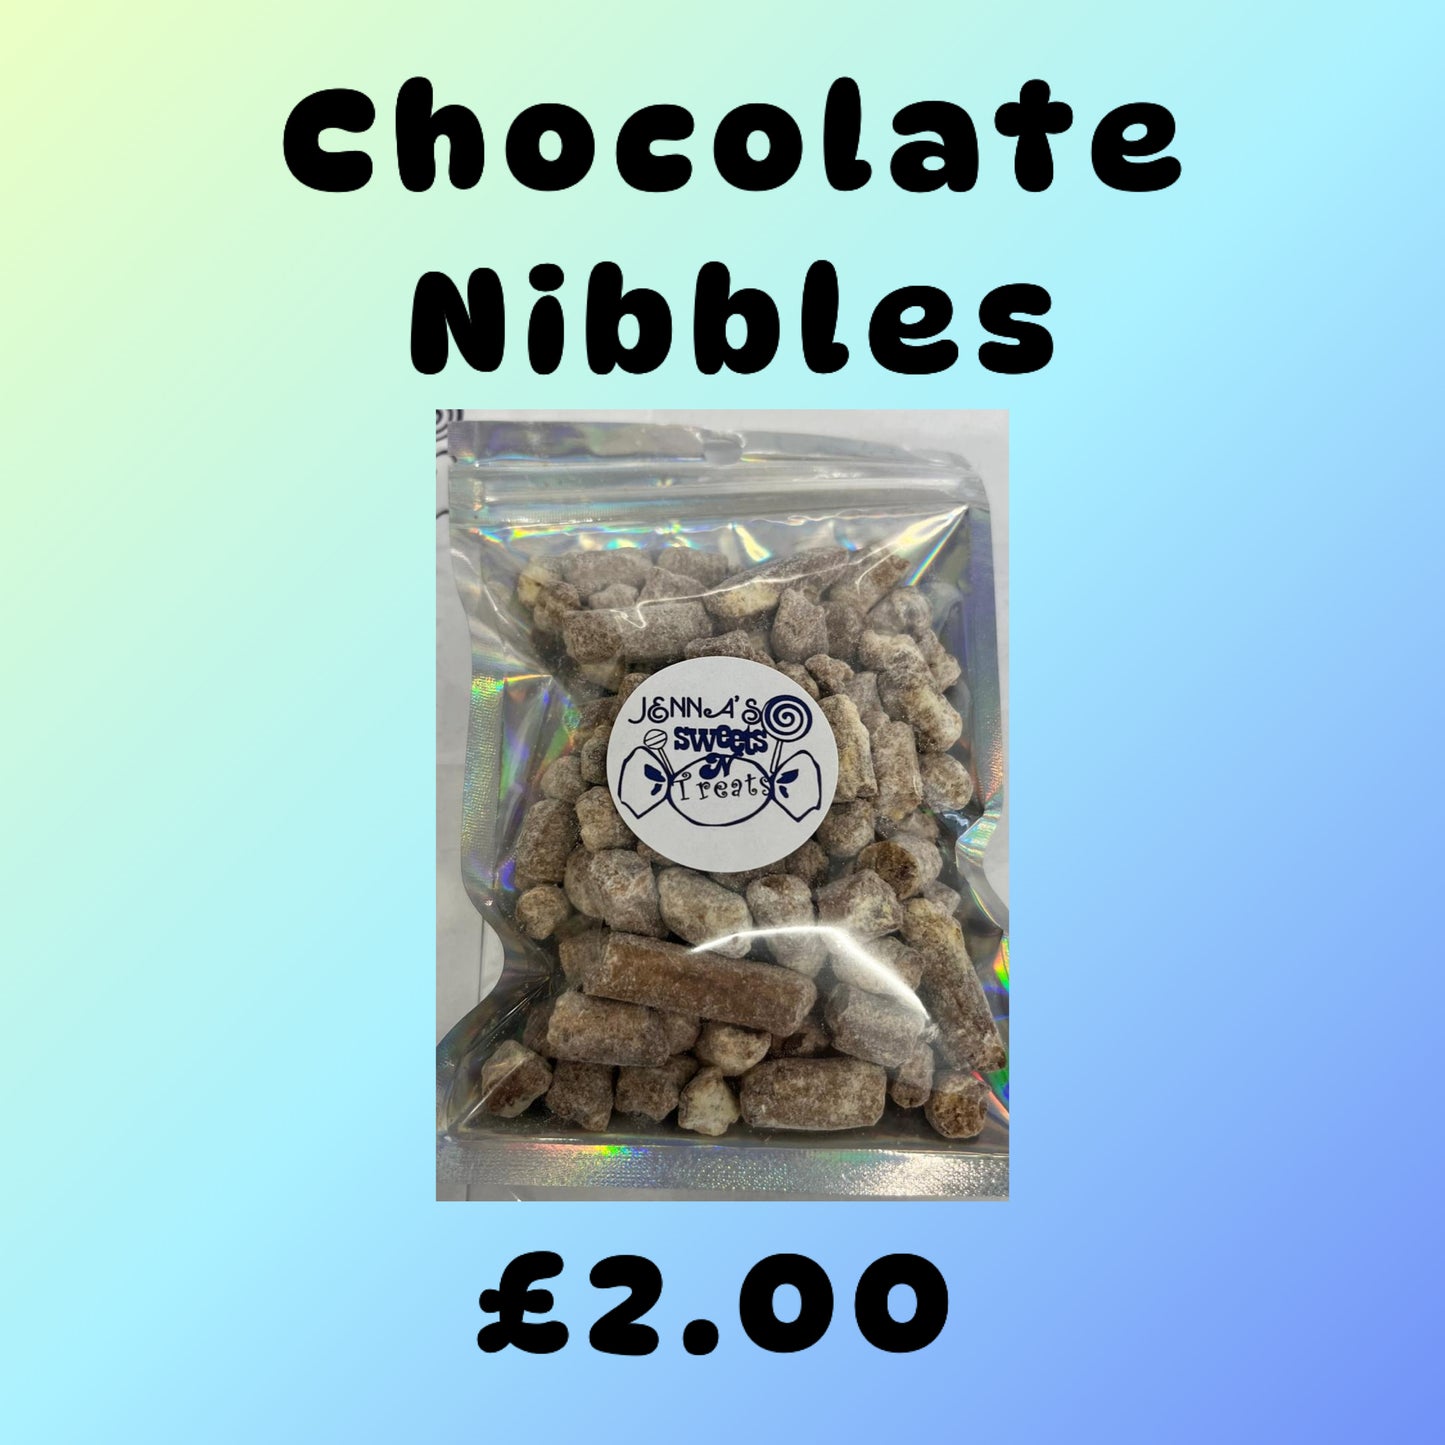 Chocolate nibbles